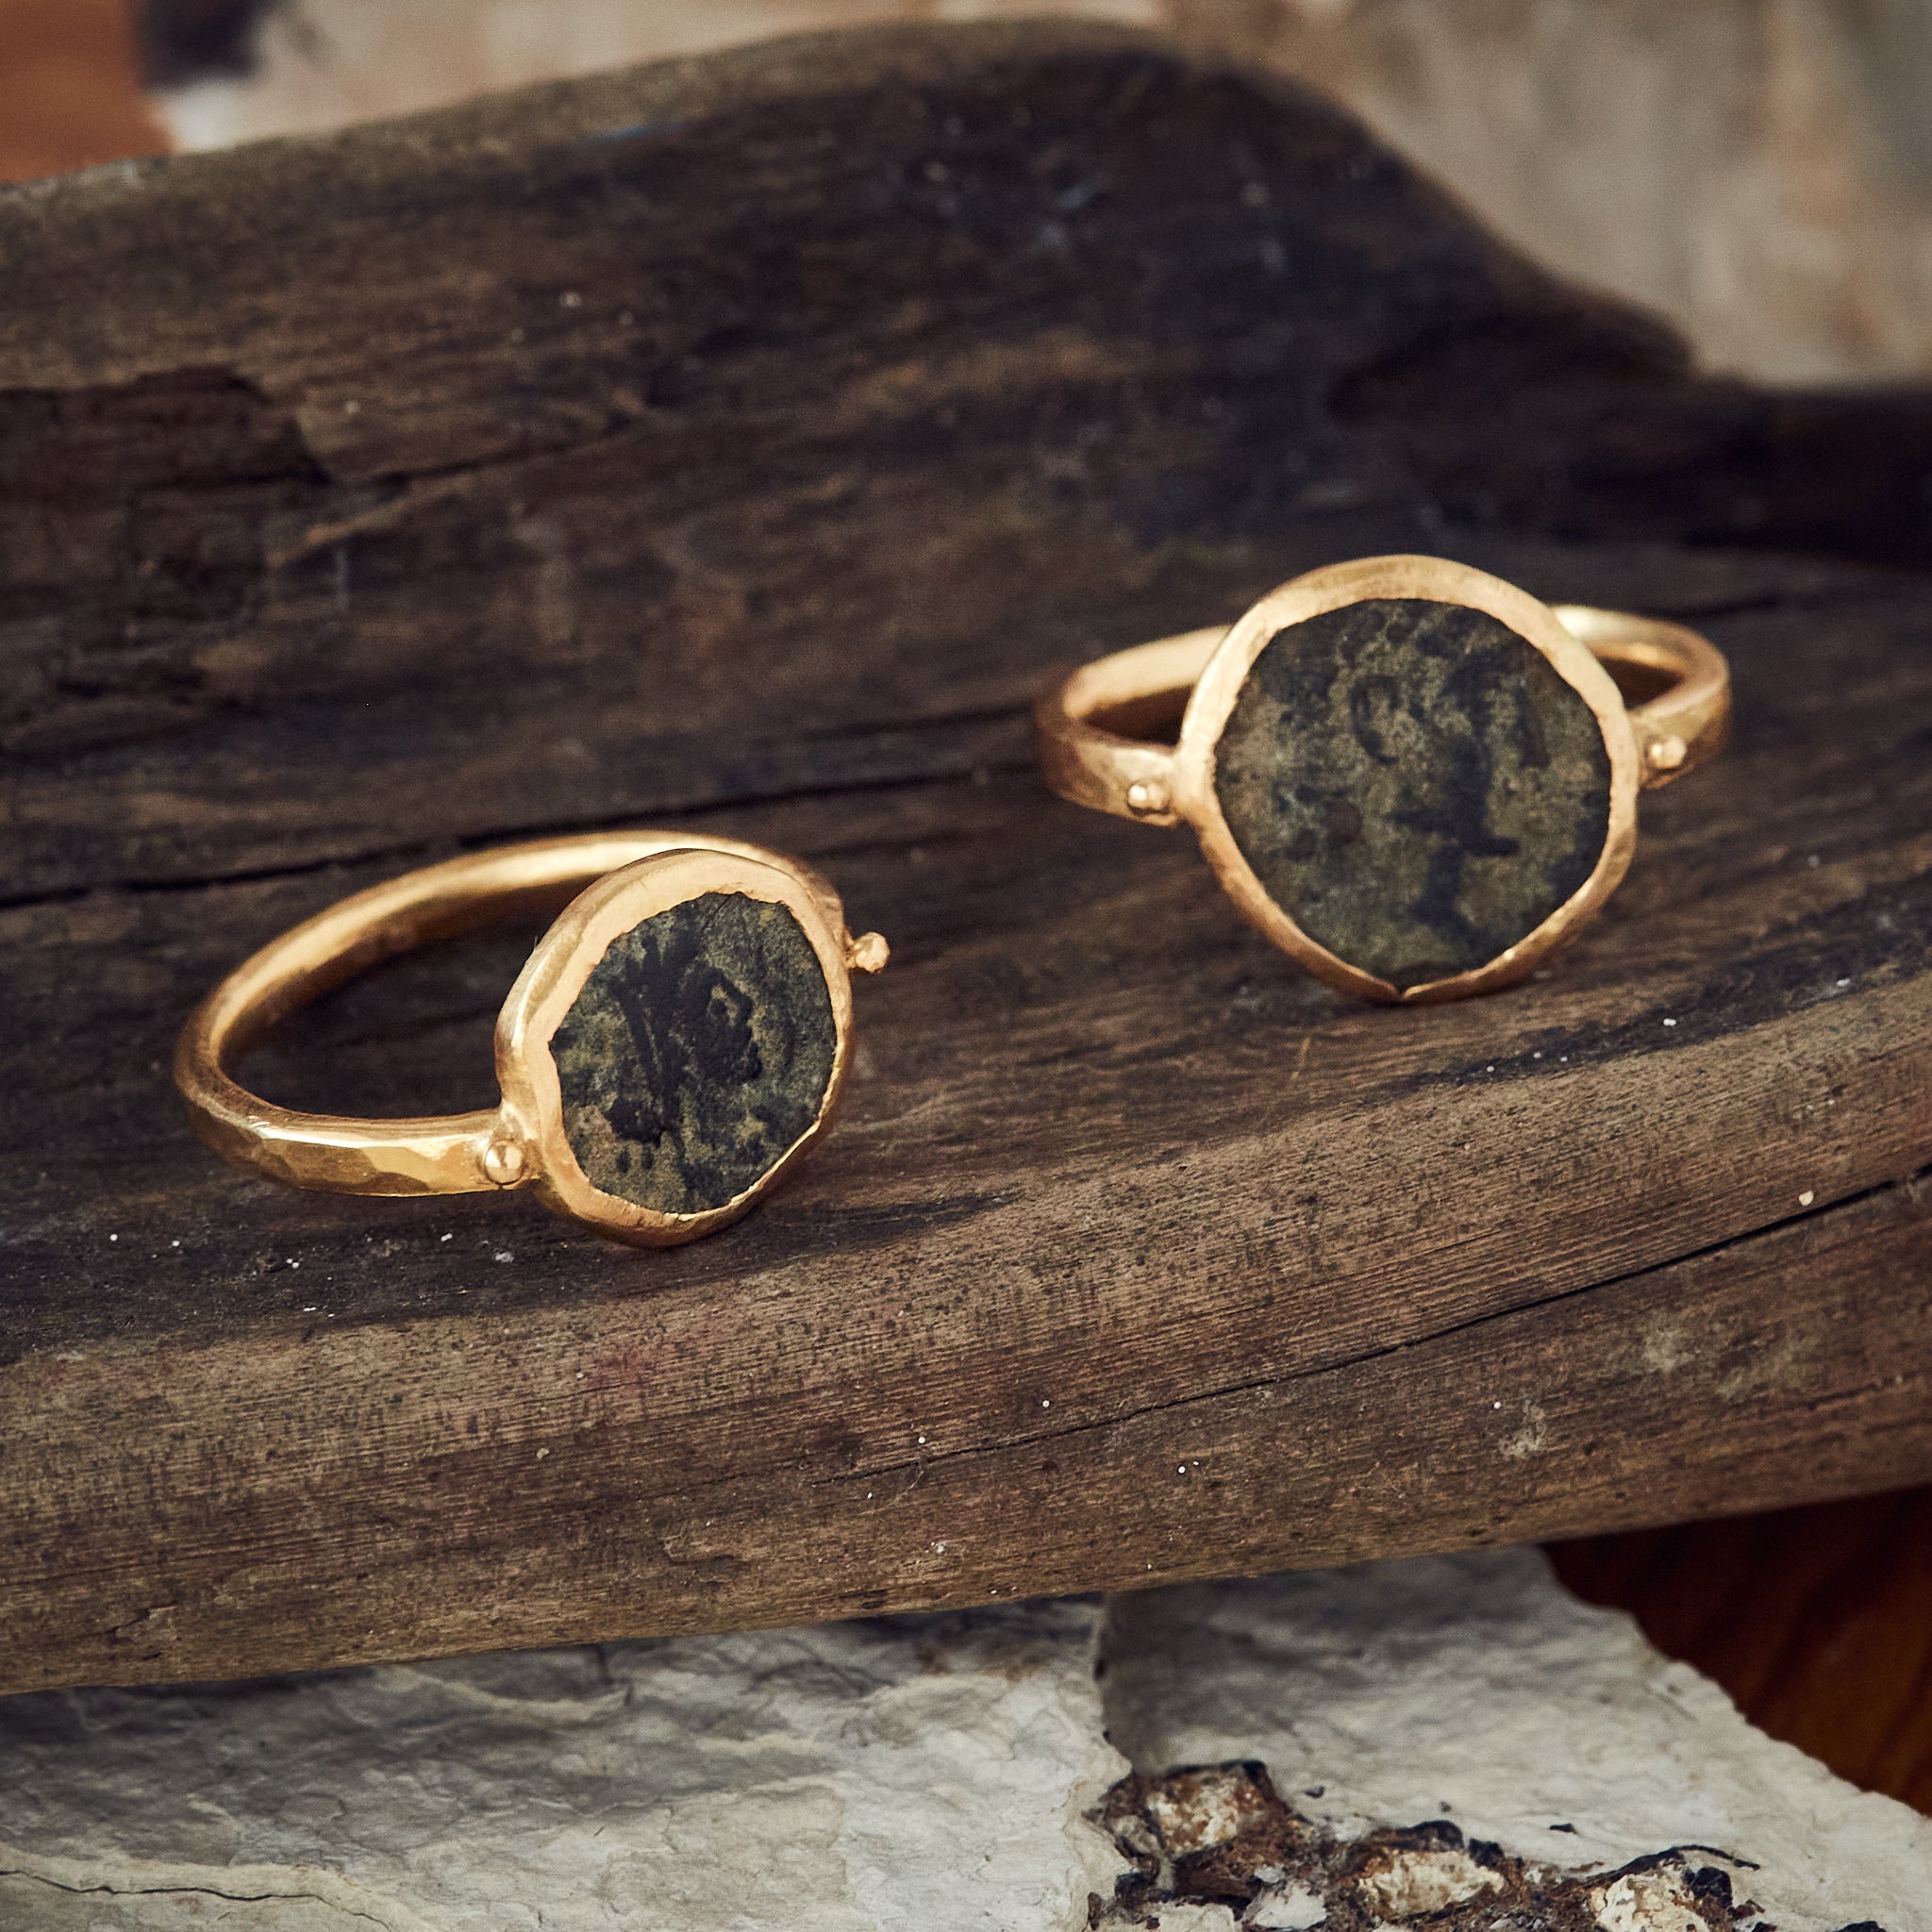 Roman Coin Rings – Ancient Creations